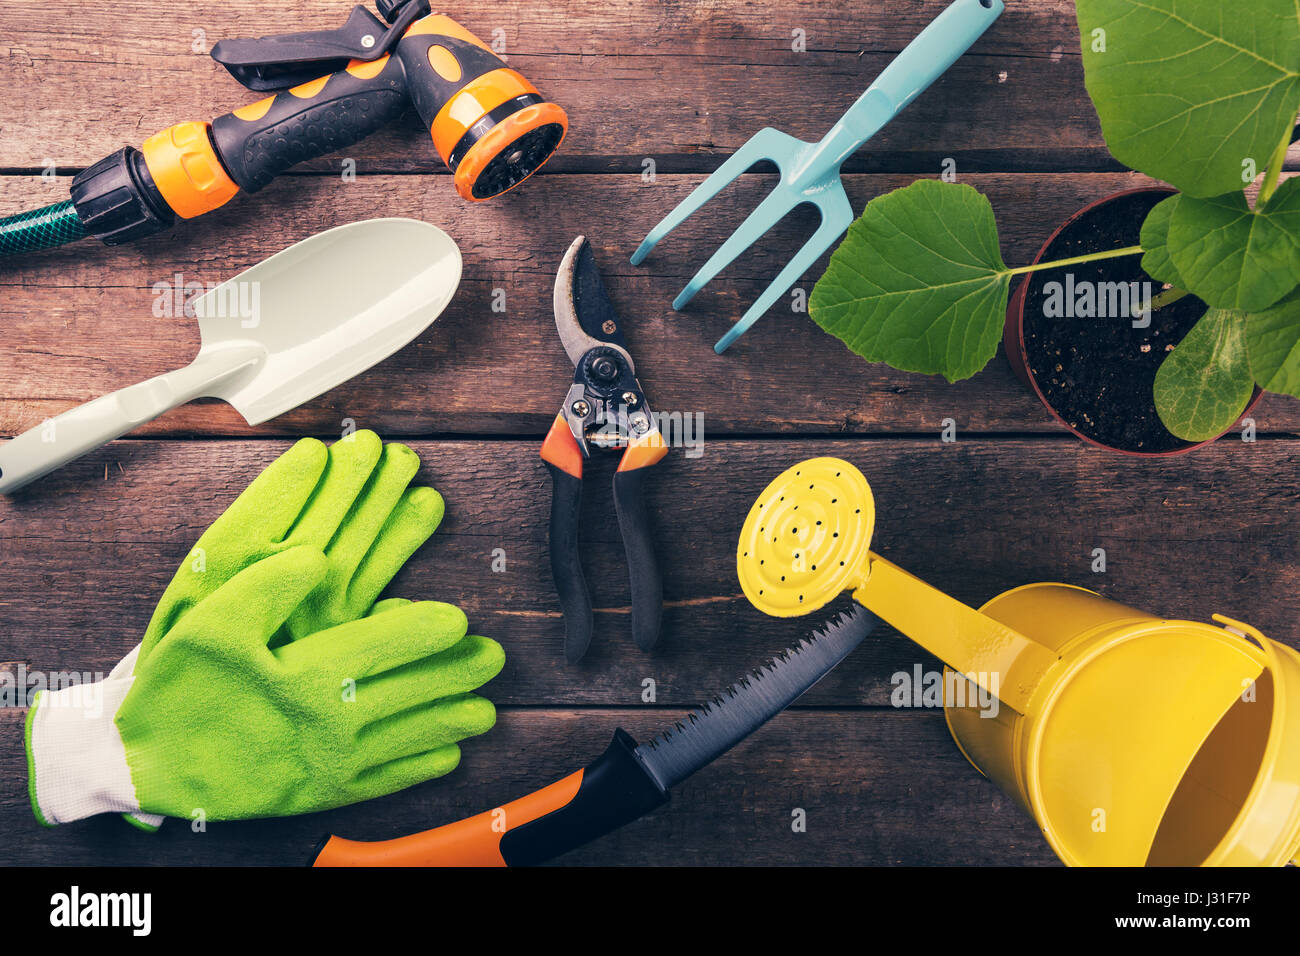 gardening tools and equipment on old wooden background Stock Photo